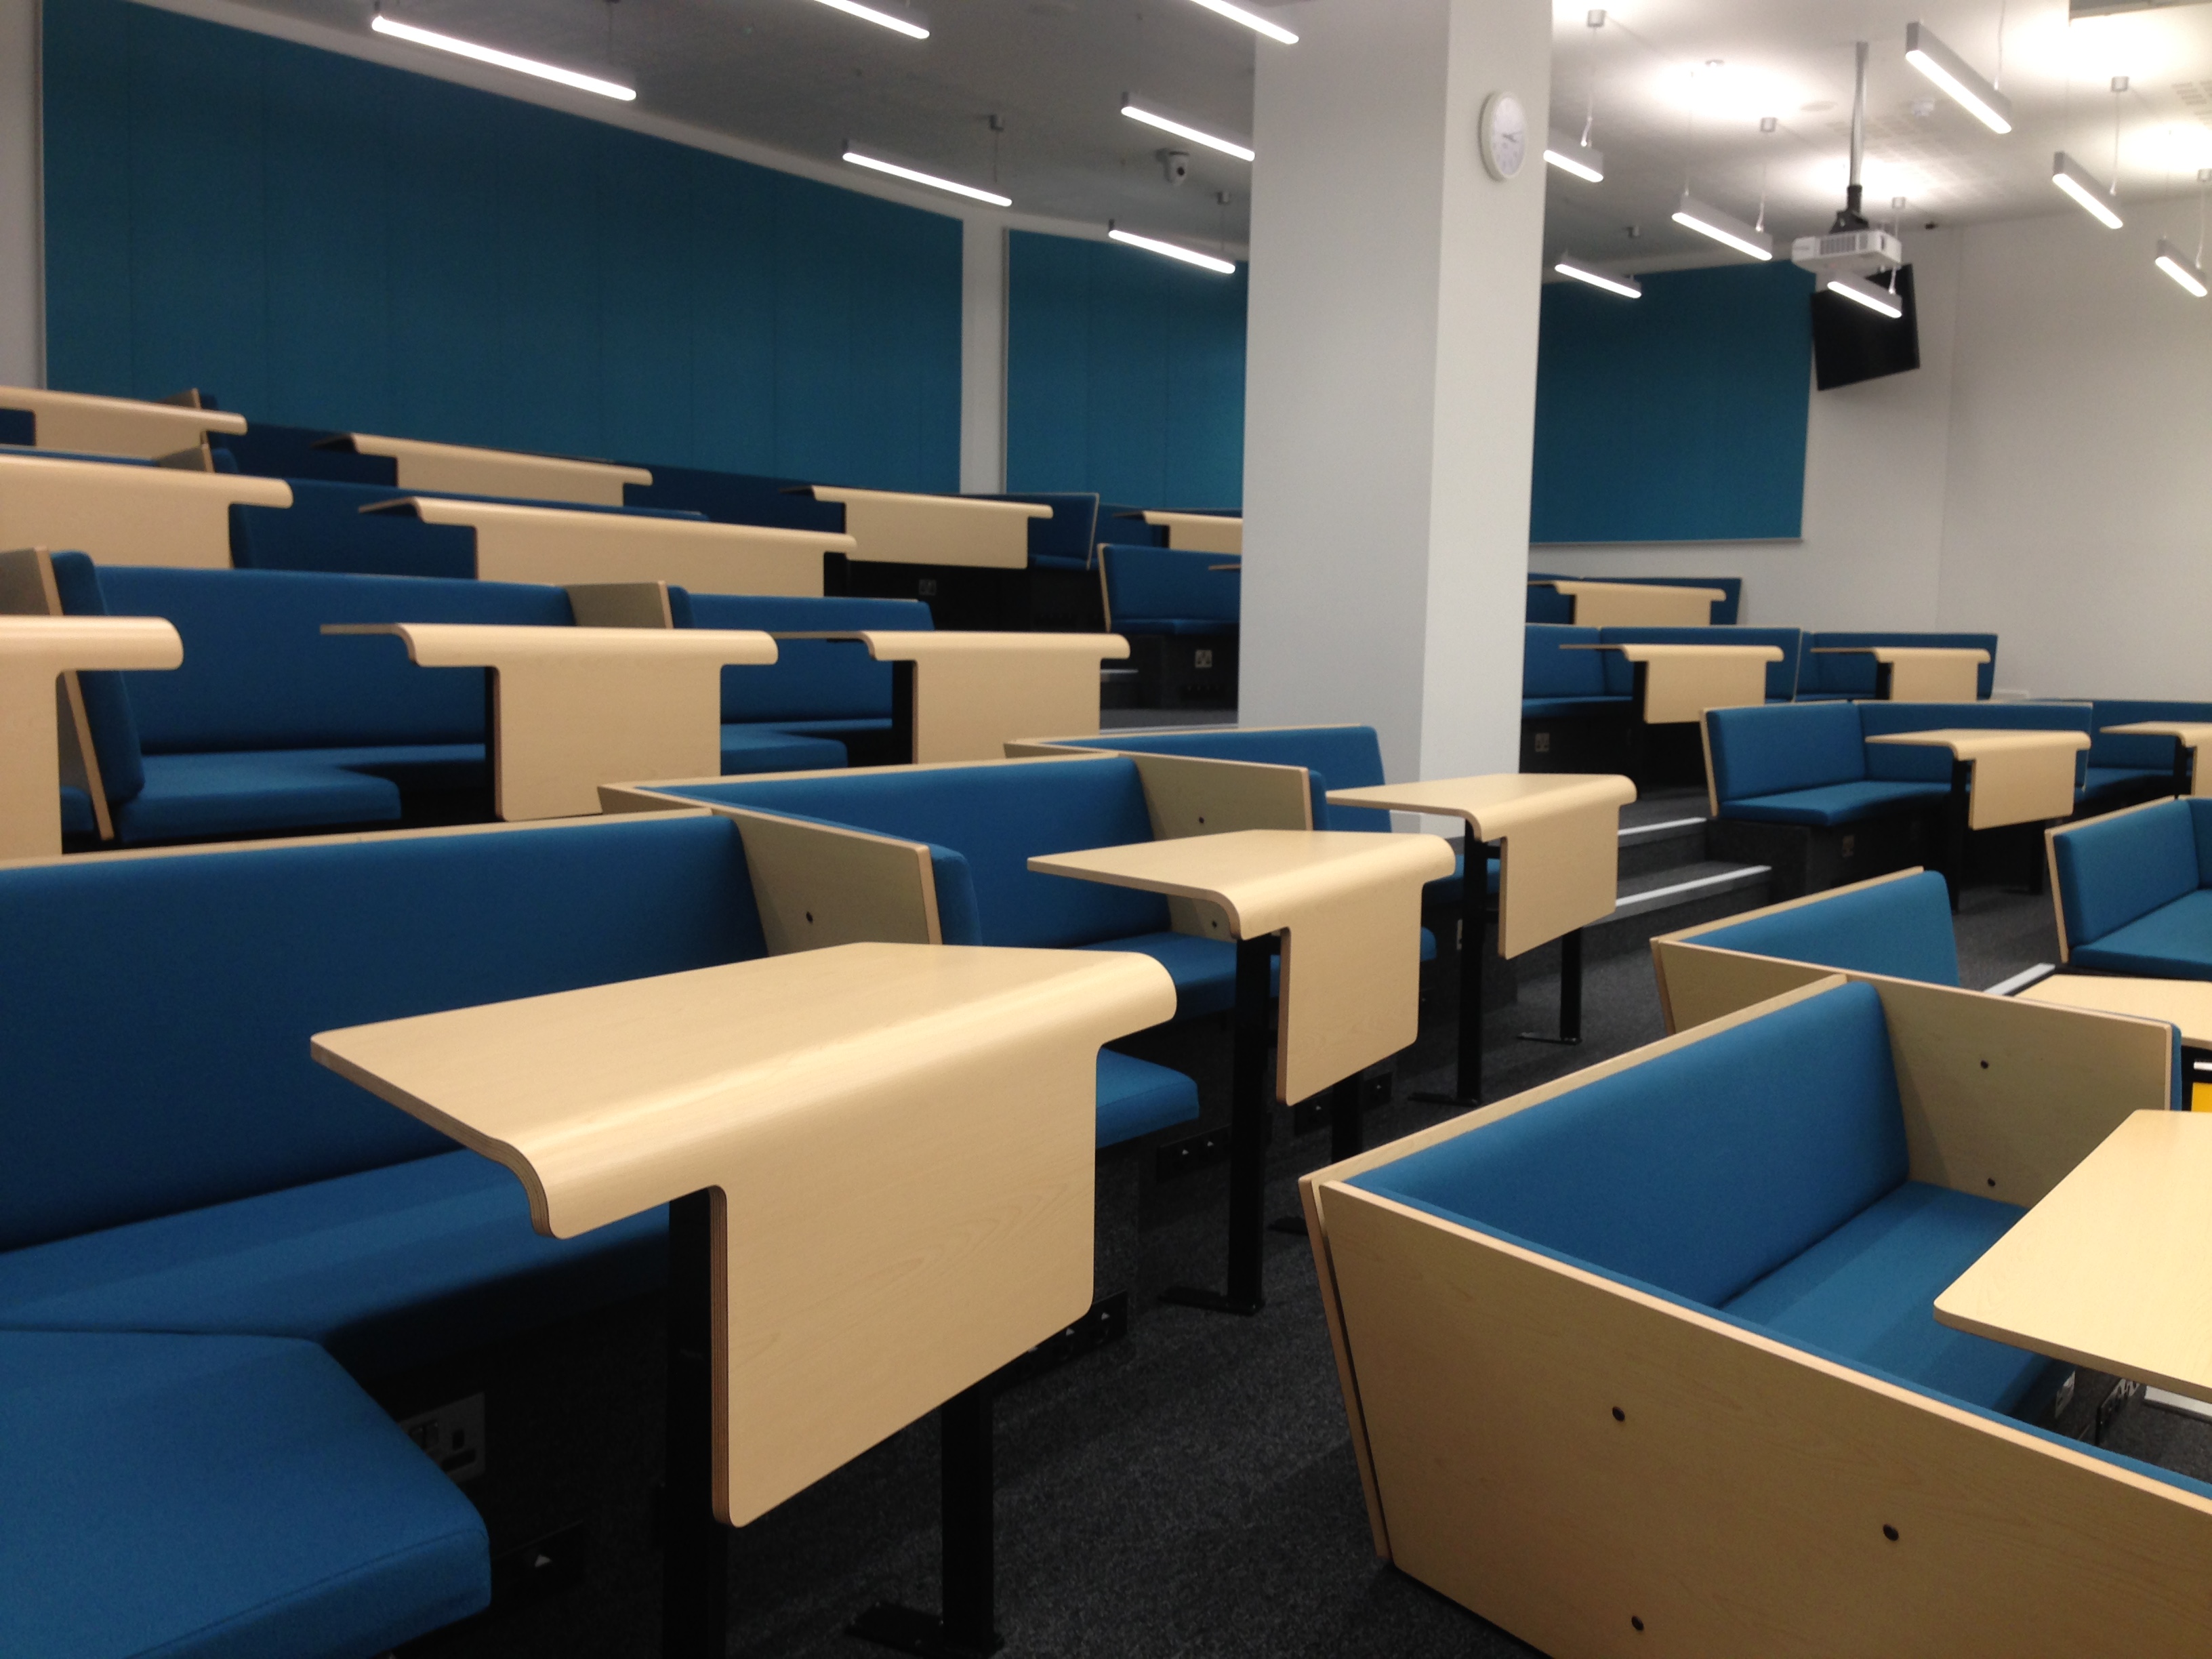 Cluster seating lecture theatre